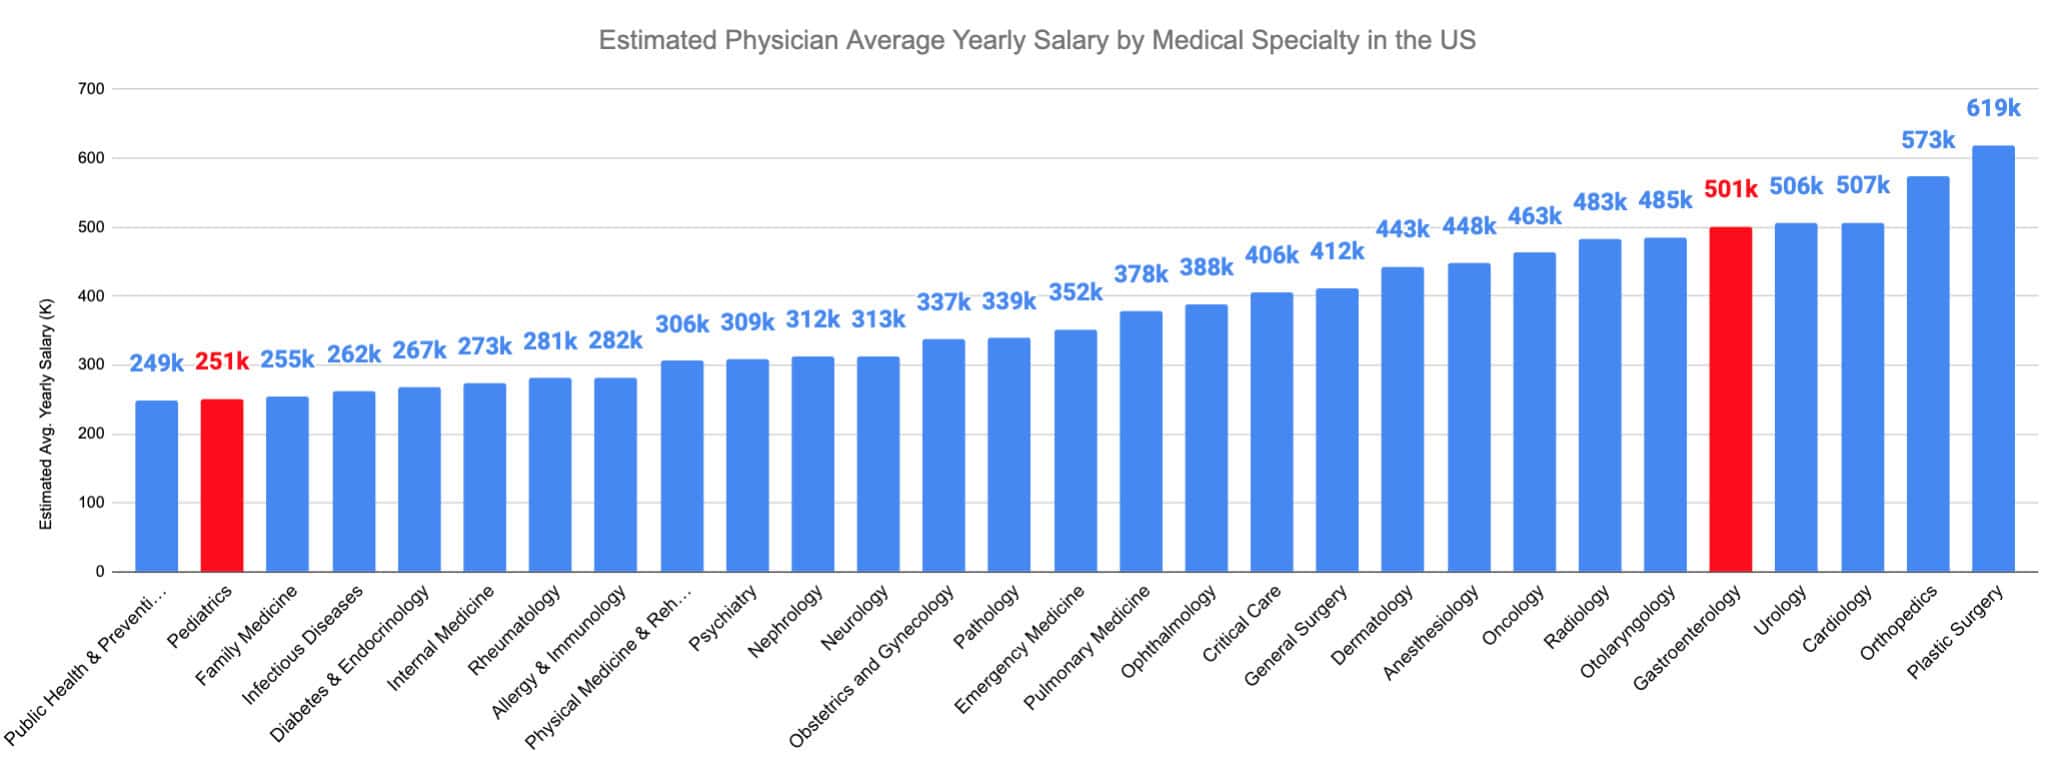 Gastroenterology vs. Pediatrics Estimated Physician Average Yearly Salary by Medical Specialty in the US